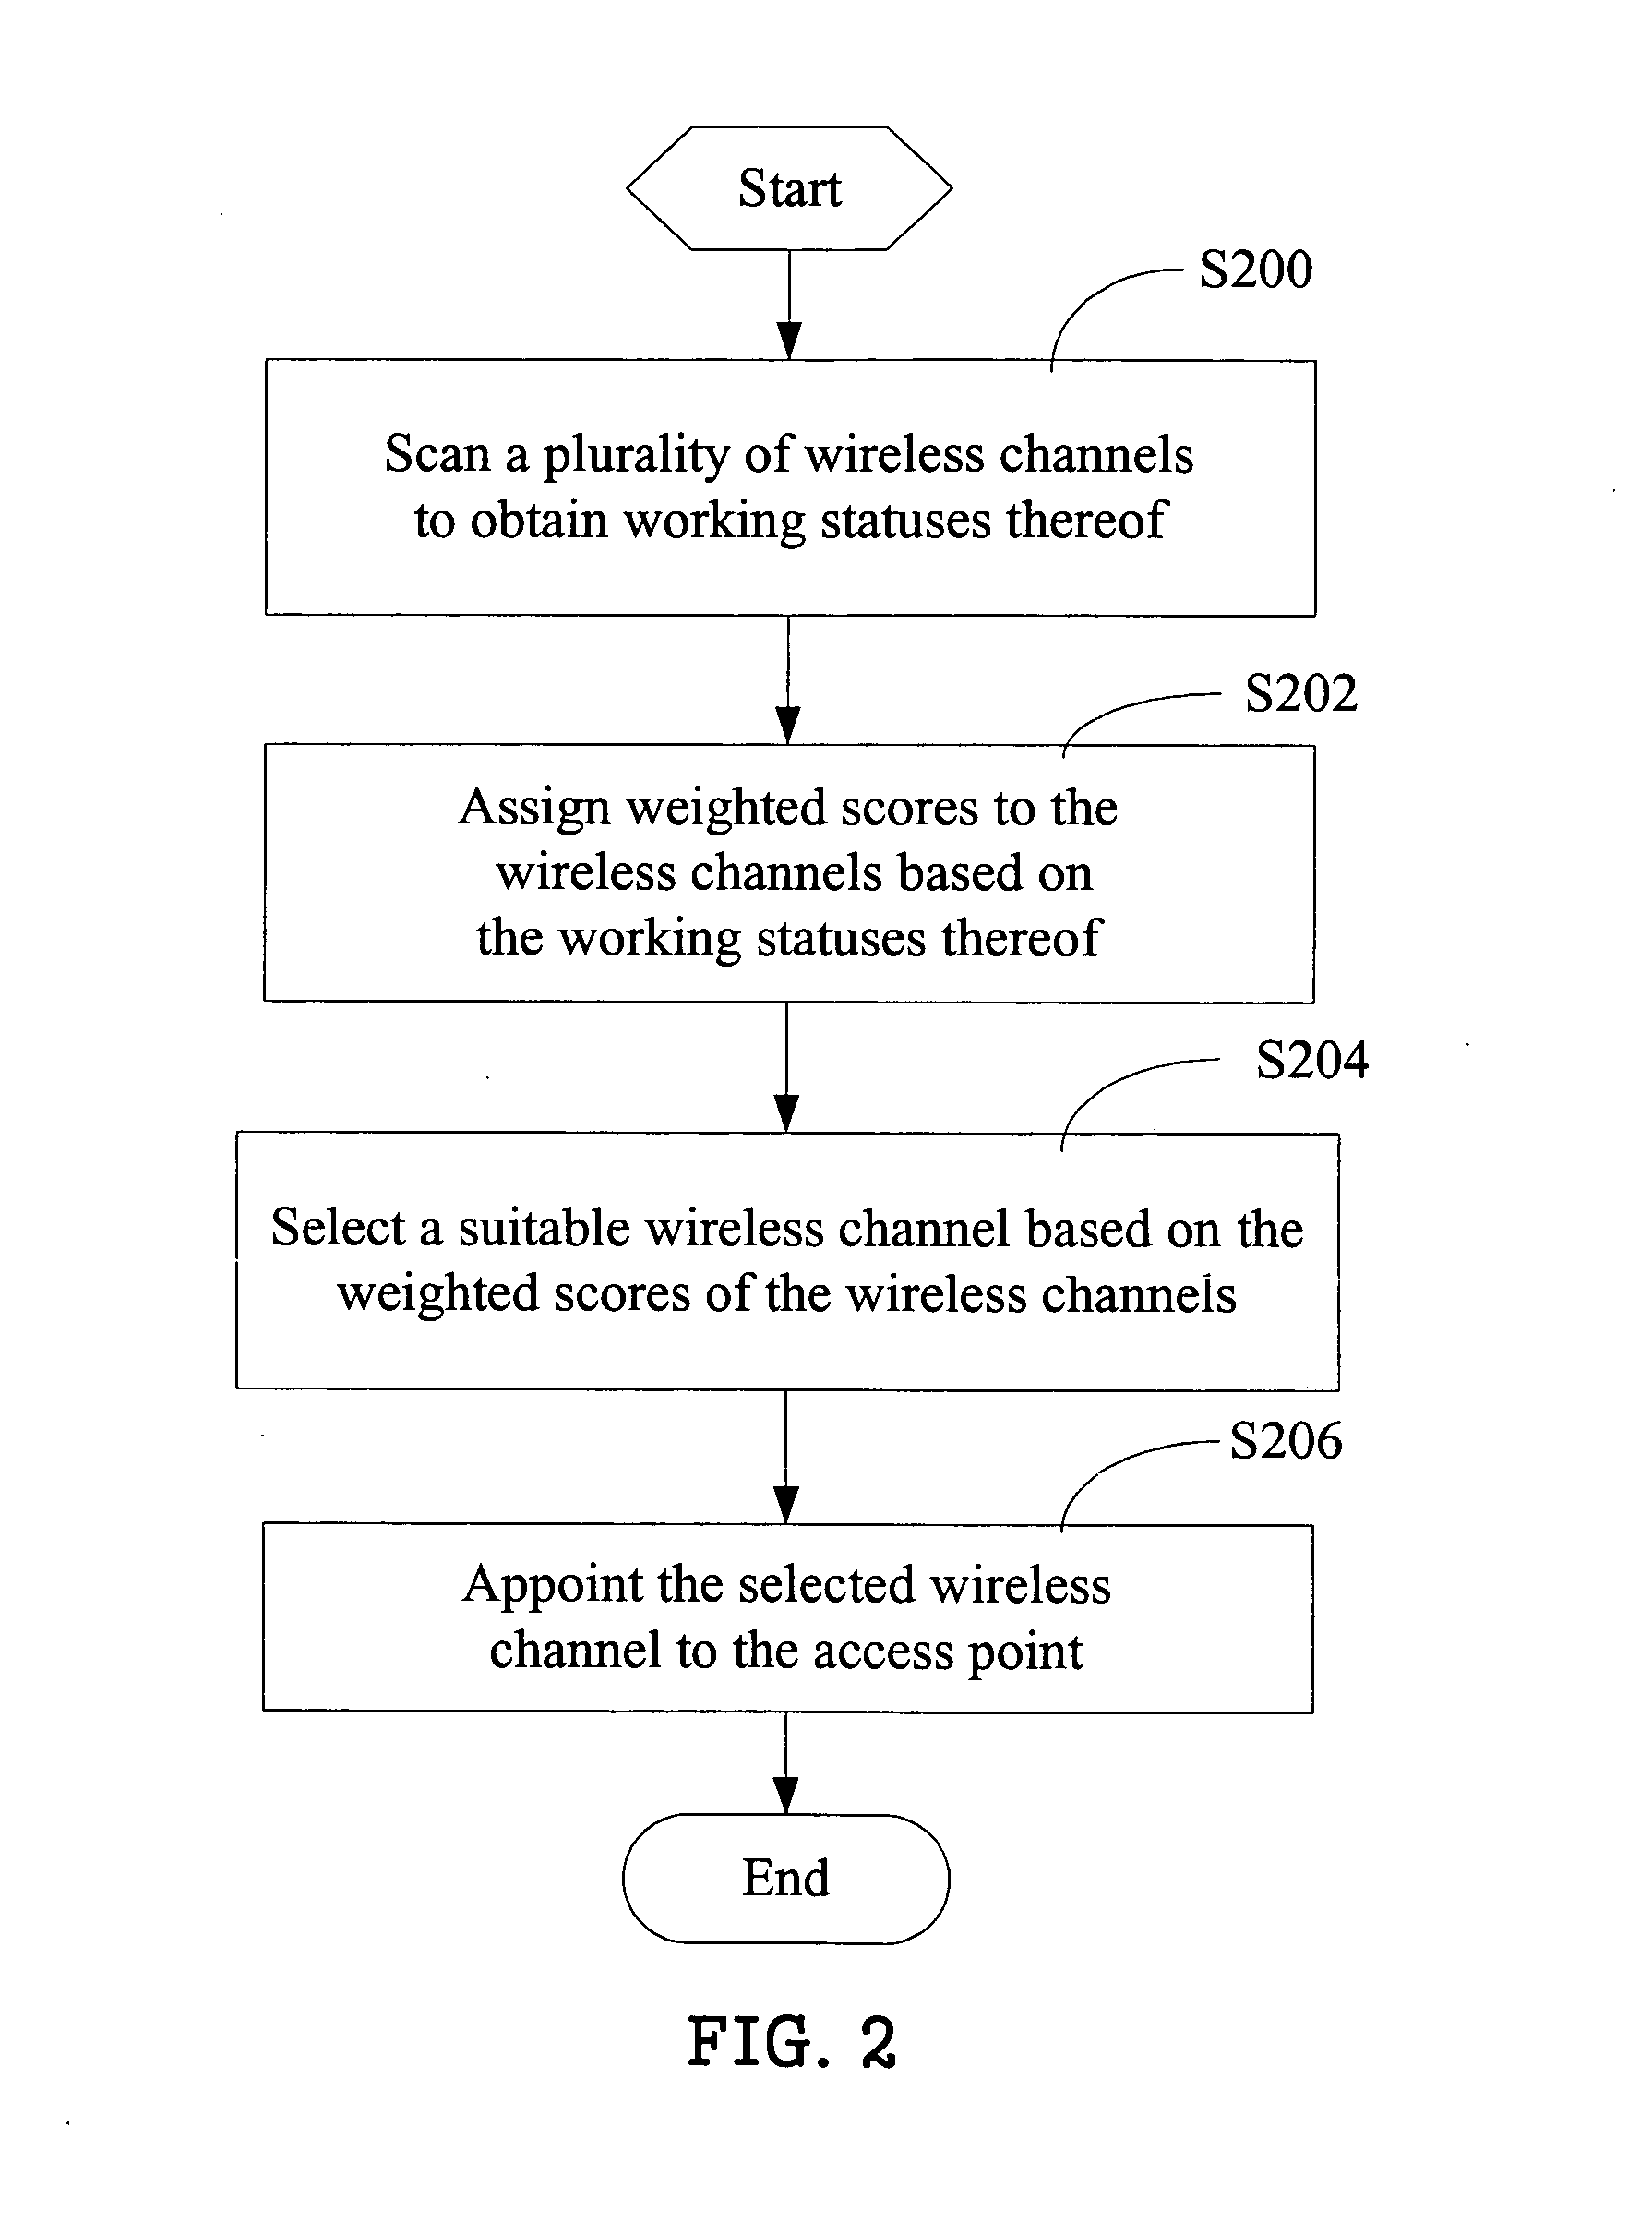 Access point and method for selecting a wireless channel